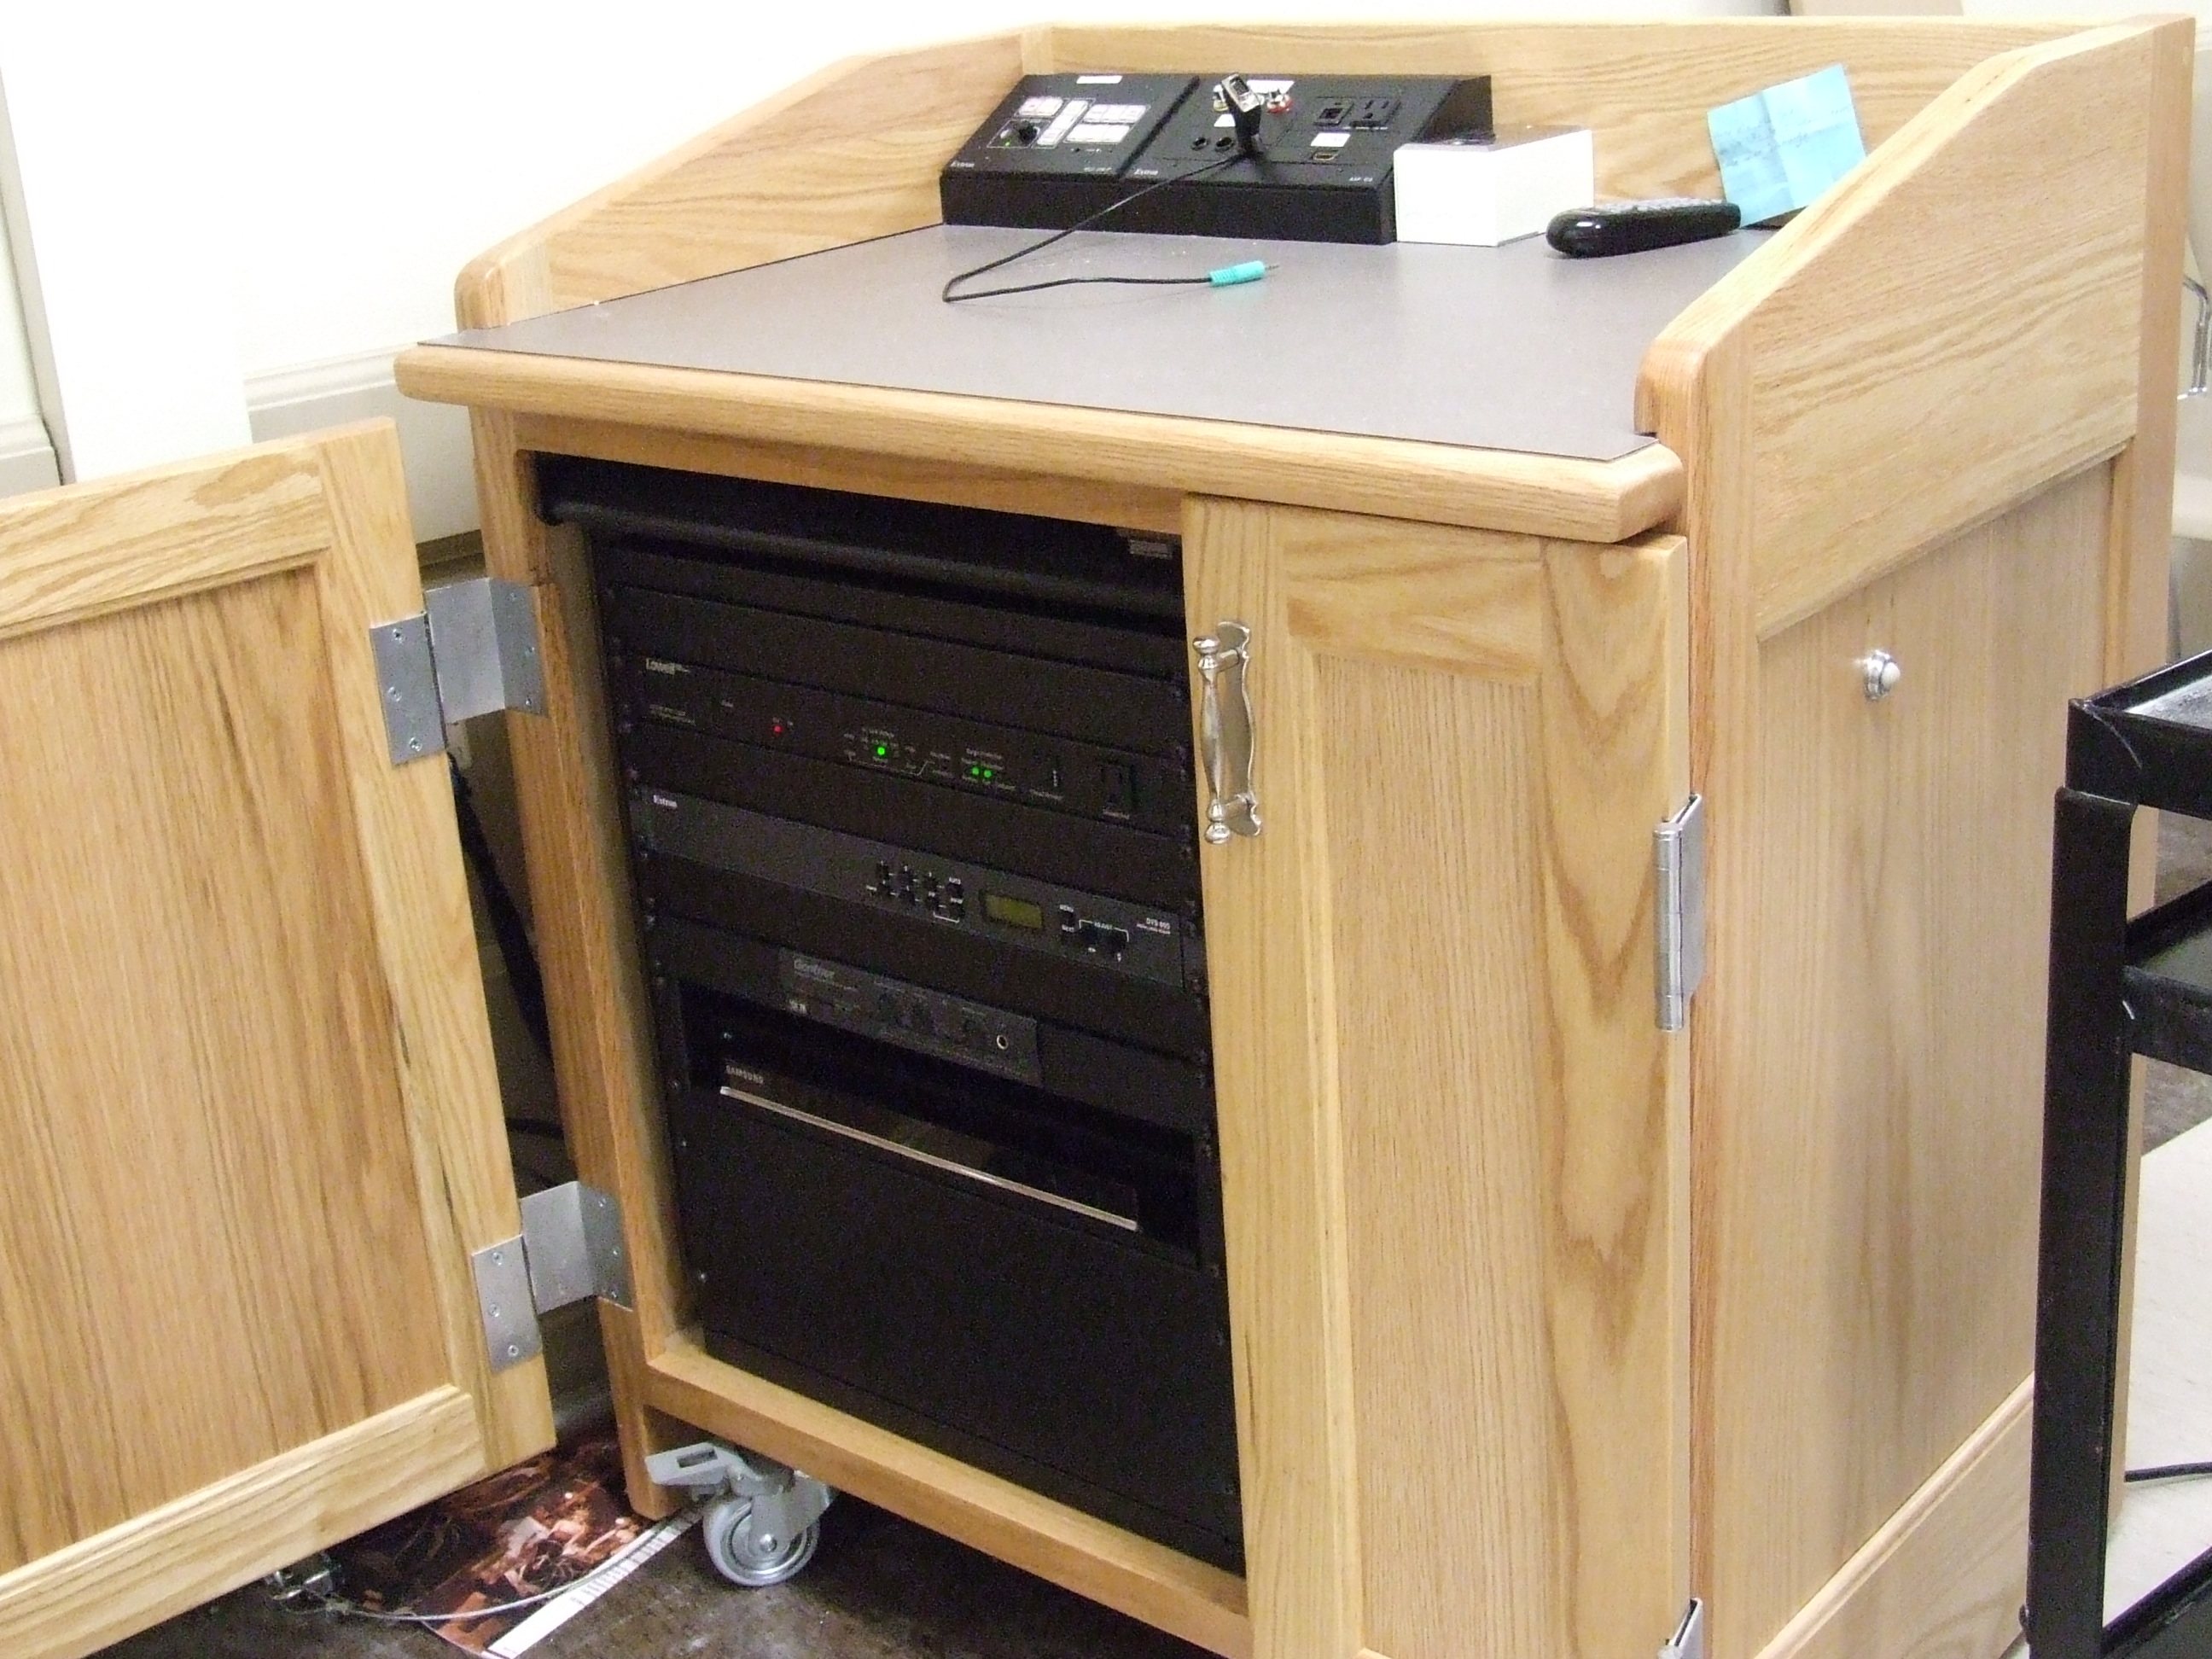 A view of the open cabinet with HDMI input, a push button controller, and audio visual rack.